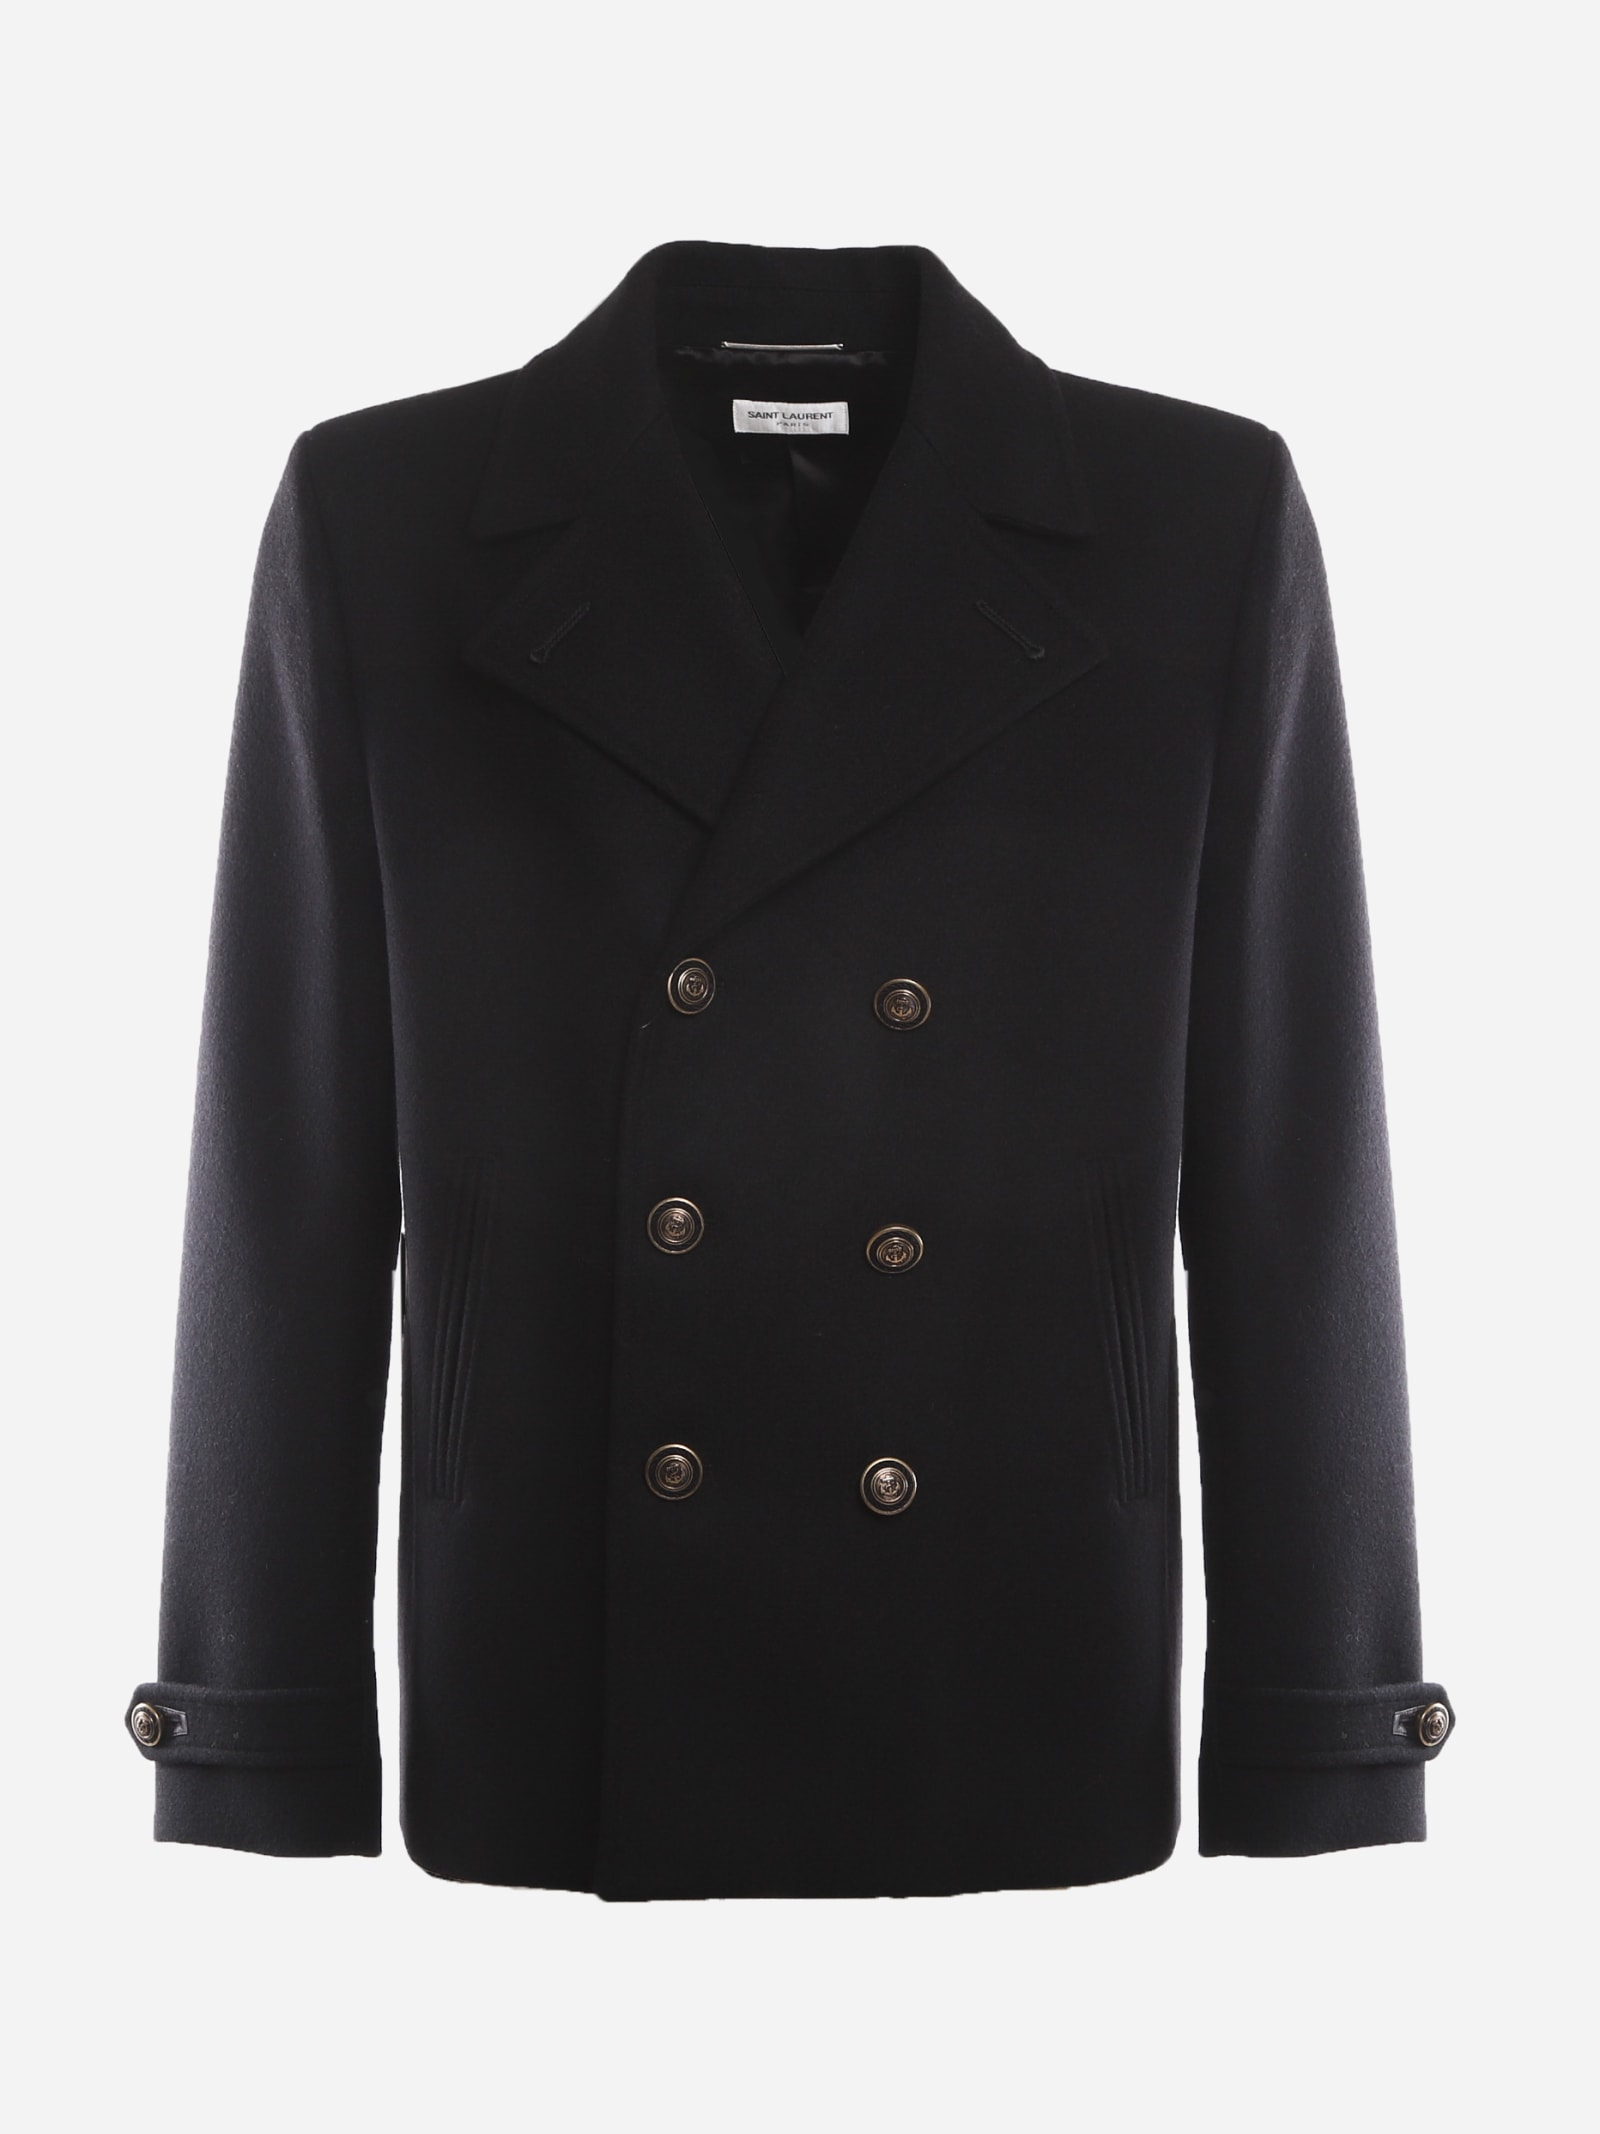 Saint Laurent Double-breasted Pea Coat Made Of Wool